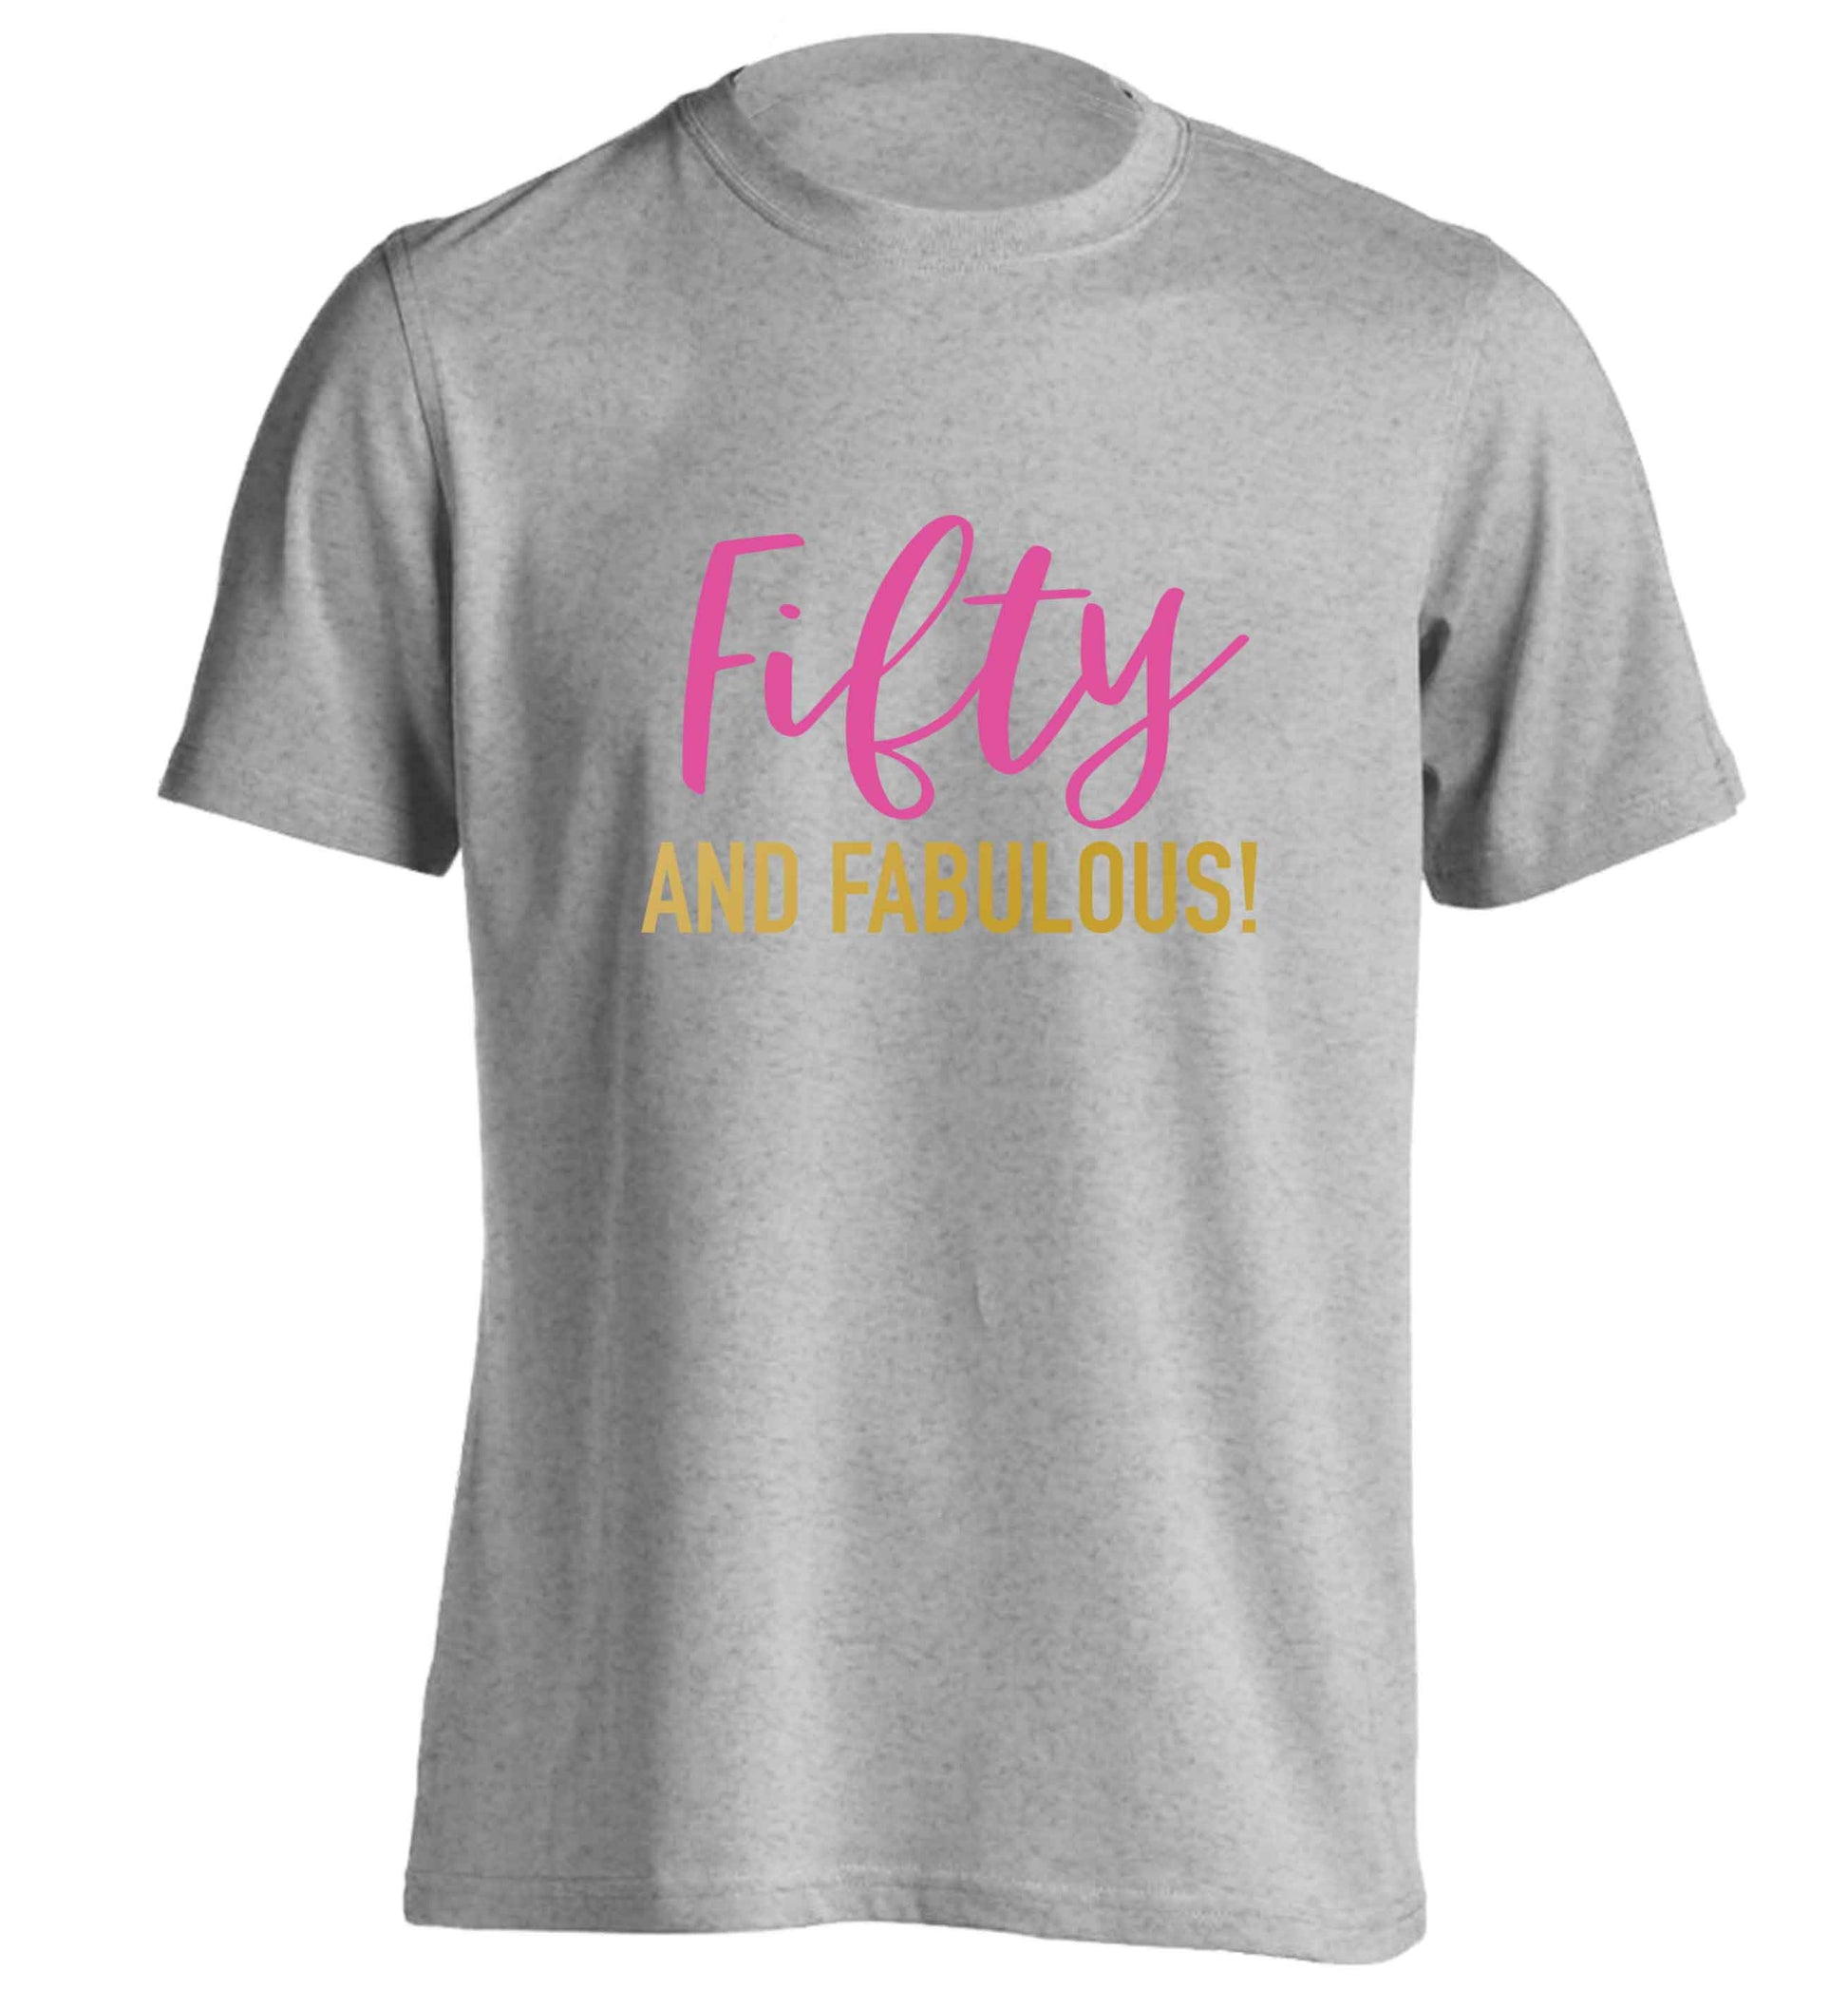 Fifty and fabulous adults unisex grey Tshirt 2XL